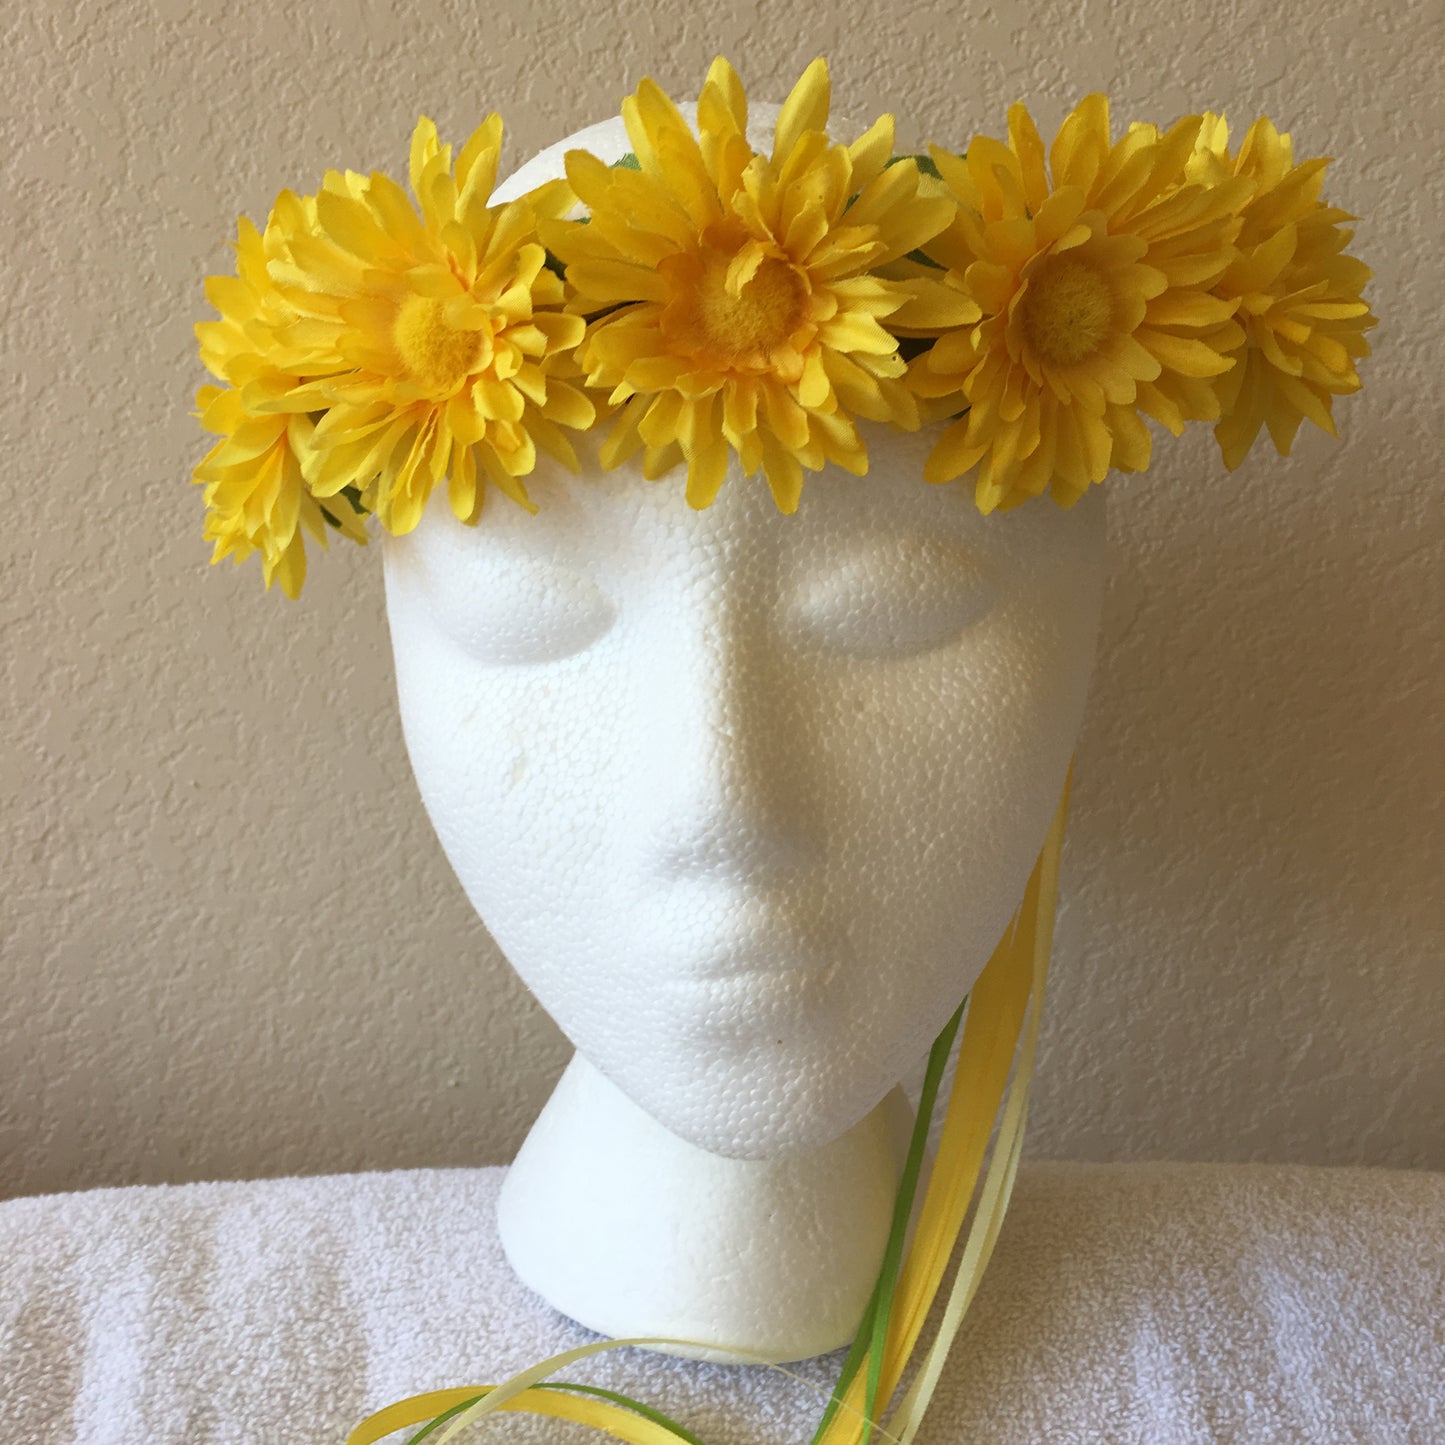 Small Wreath - All yellow daisies